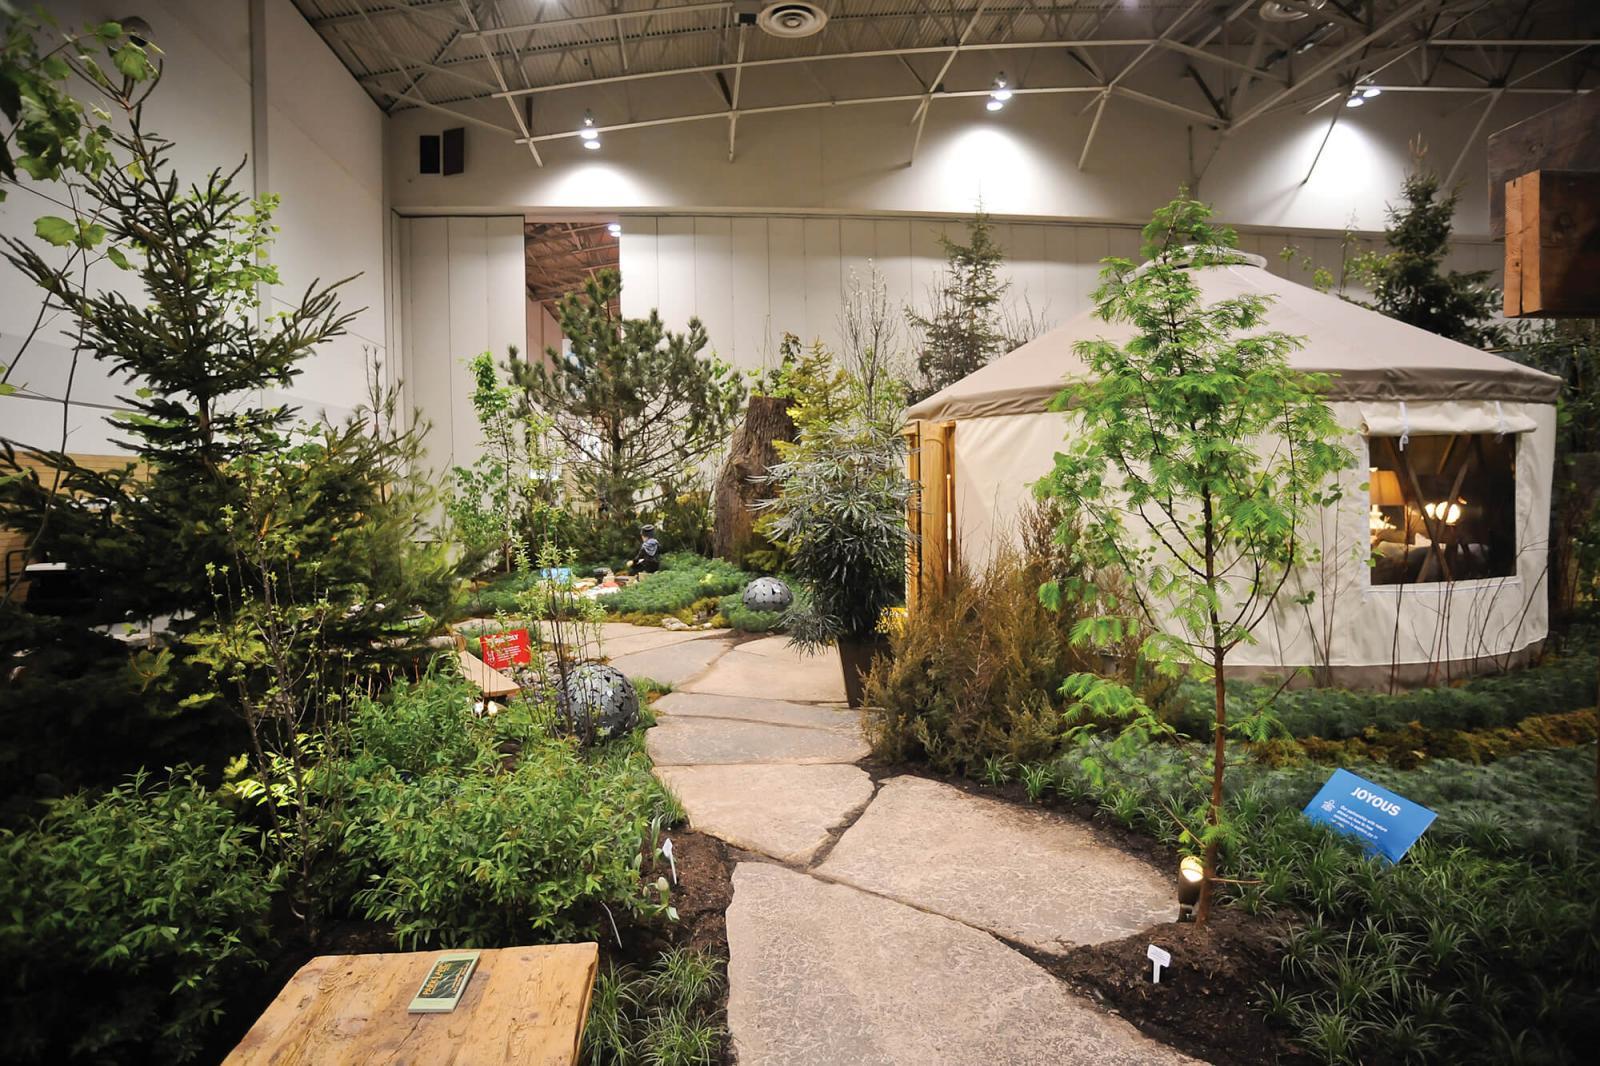 The Canada Blooms Judges’ Choice Award for Best Overall Garden went to Parklane Nurseries.